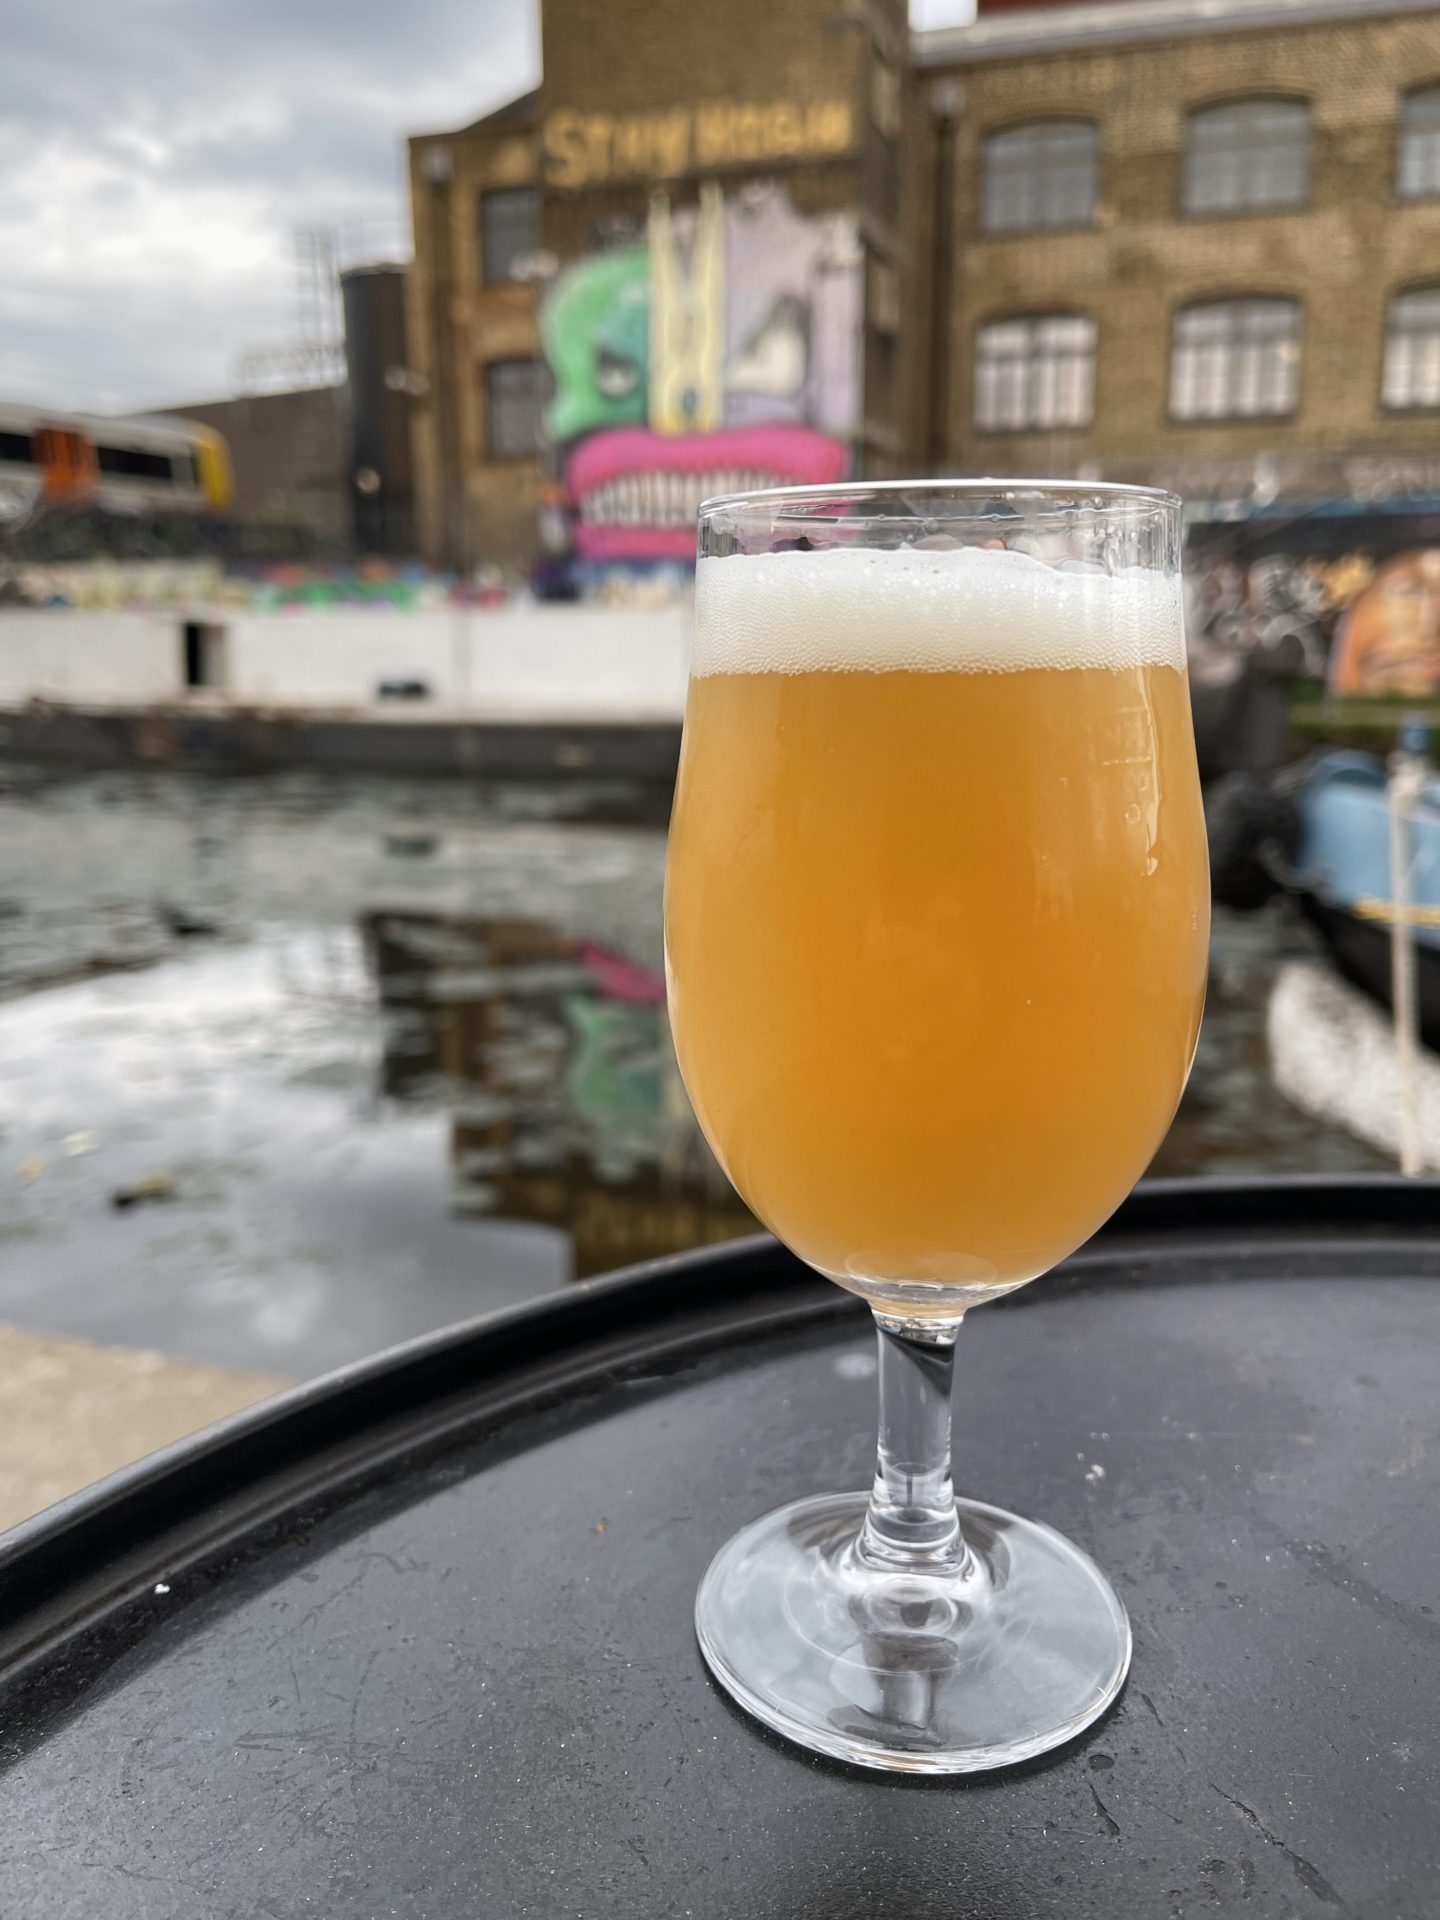 crate brewery pizzeria hackney wick craft beer - 19 Great Places for Craft Beer in Hackney - Shoreditch - Dalston - Hoxton - Clapton - Stoke Newington -  Hackney Wick - East London